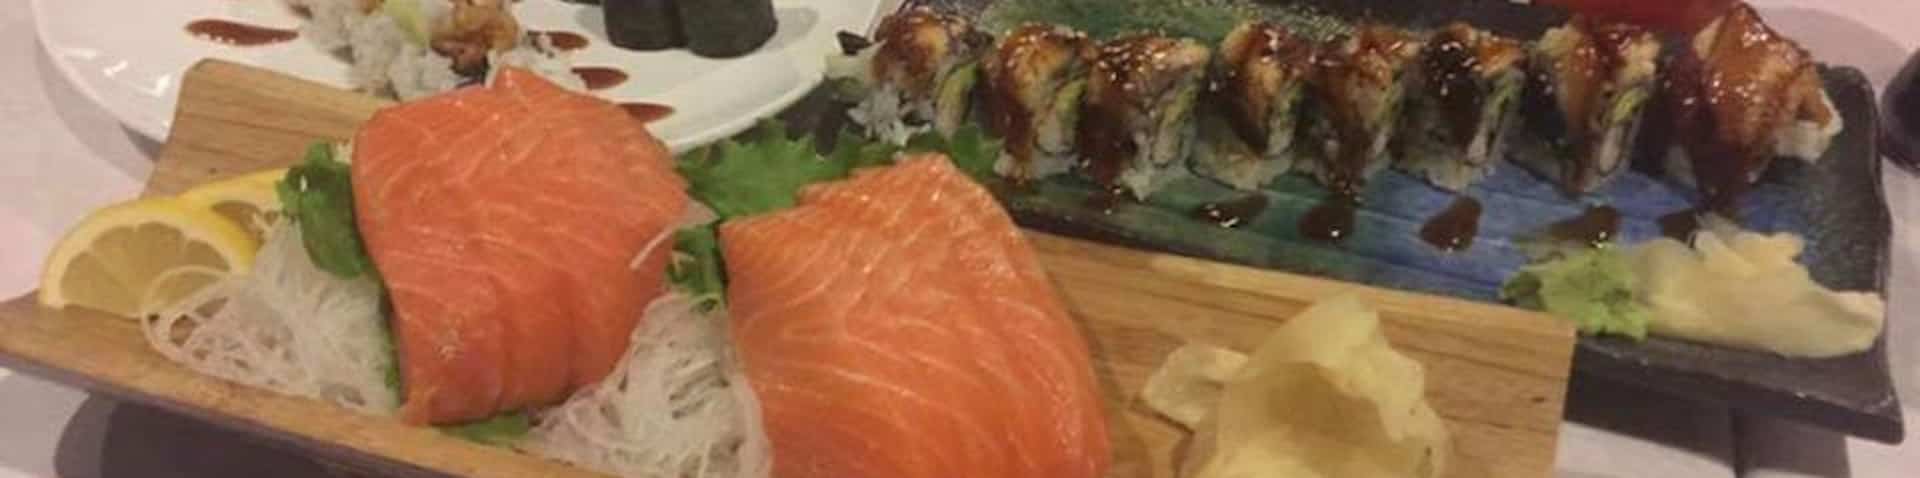 assortment of sushi dishes offered